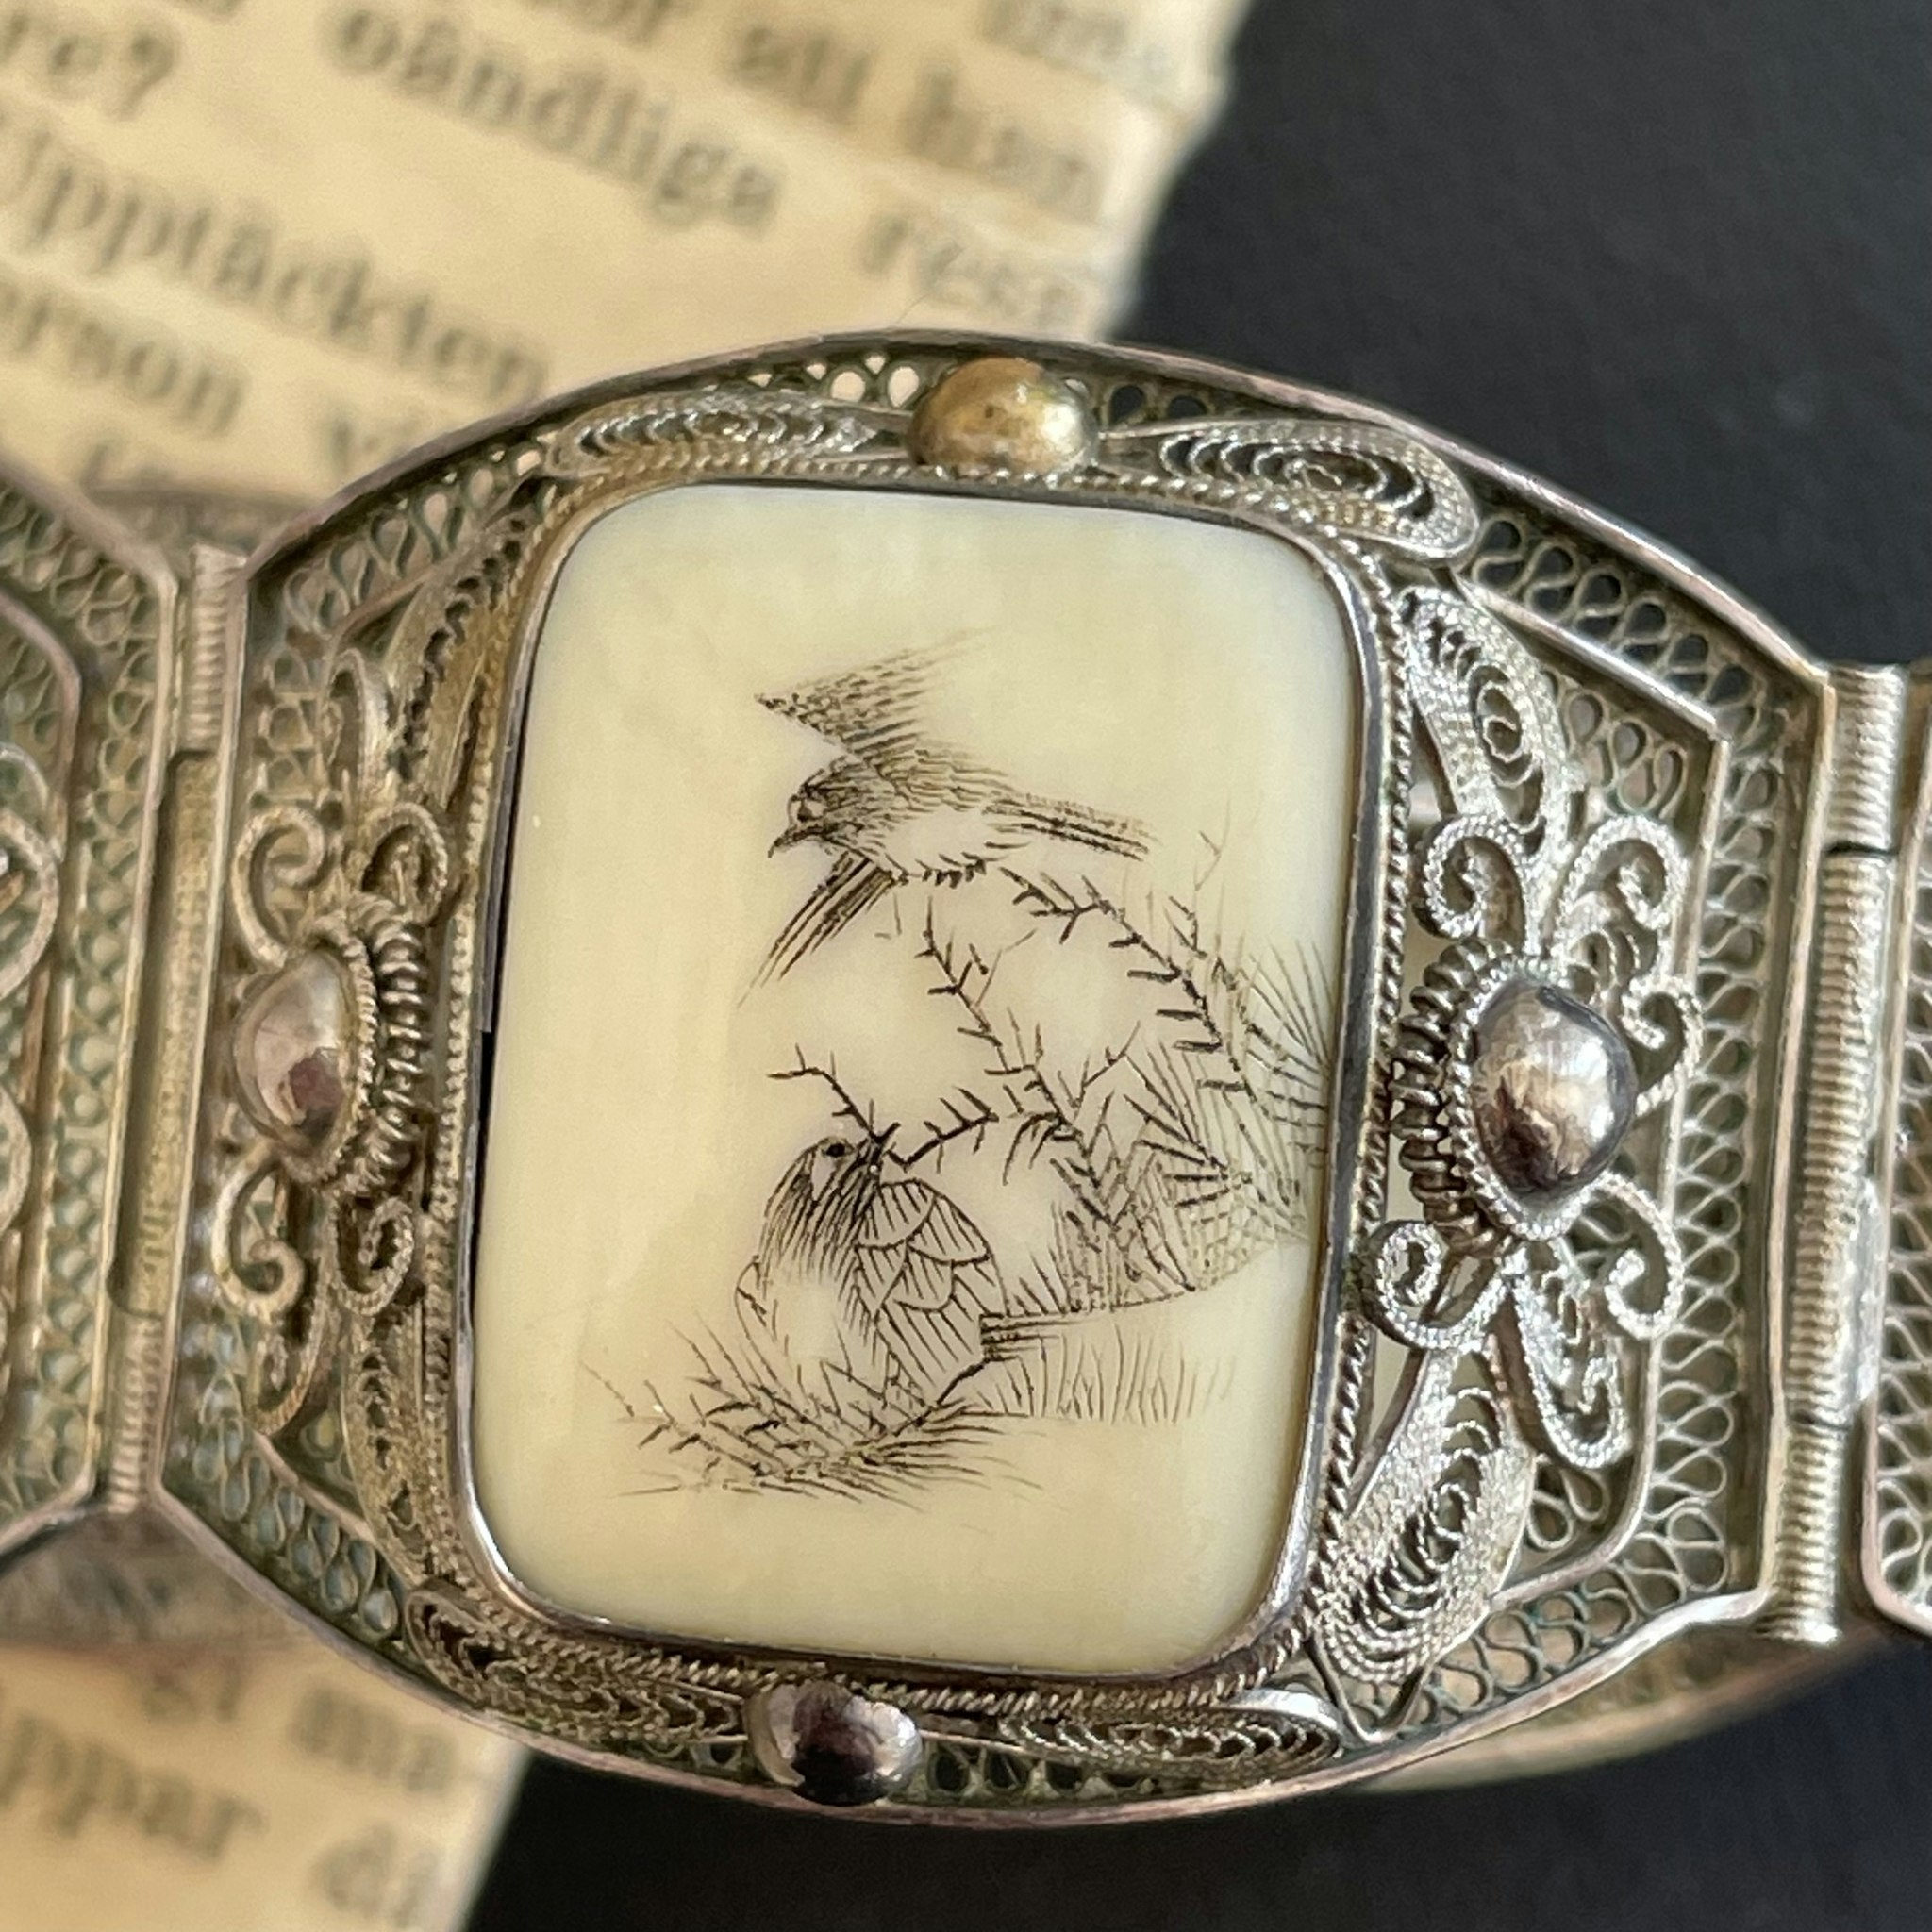 Chinese Antique handmade silver filigree bracelet with paintings republic period